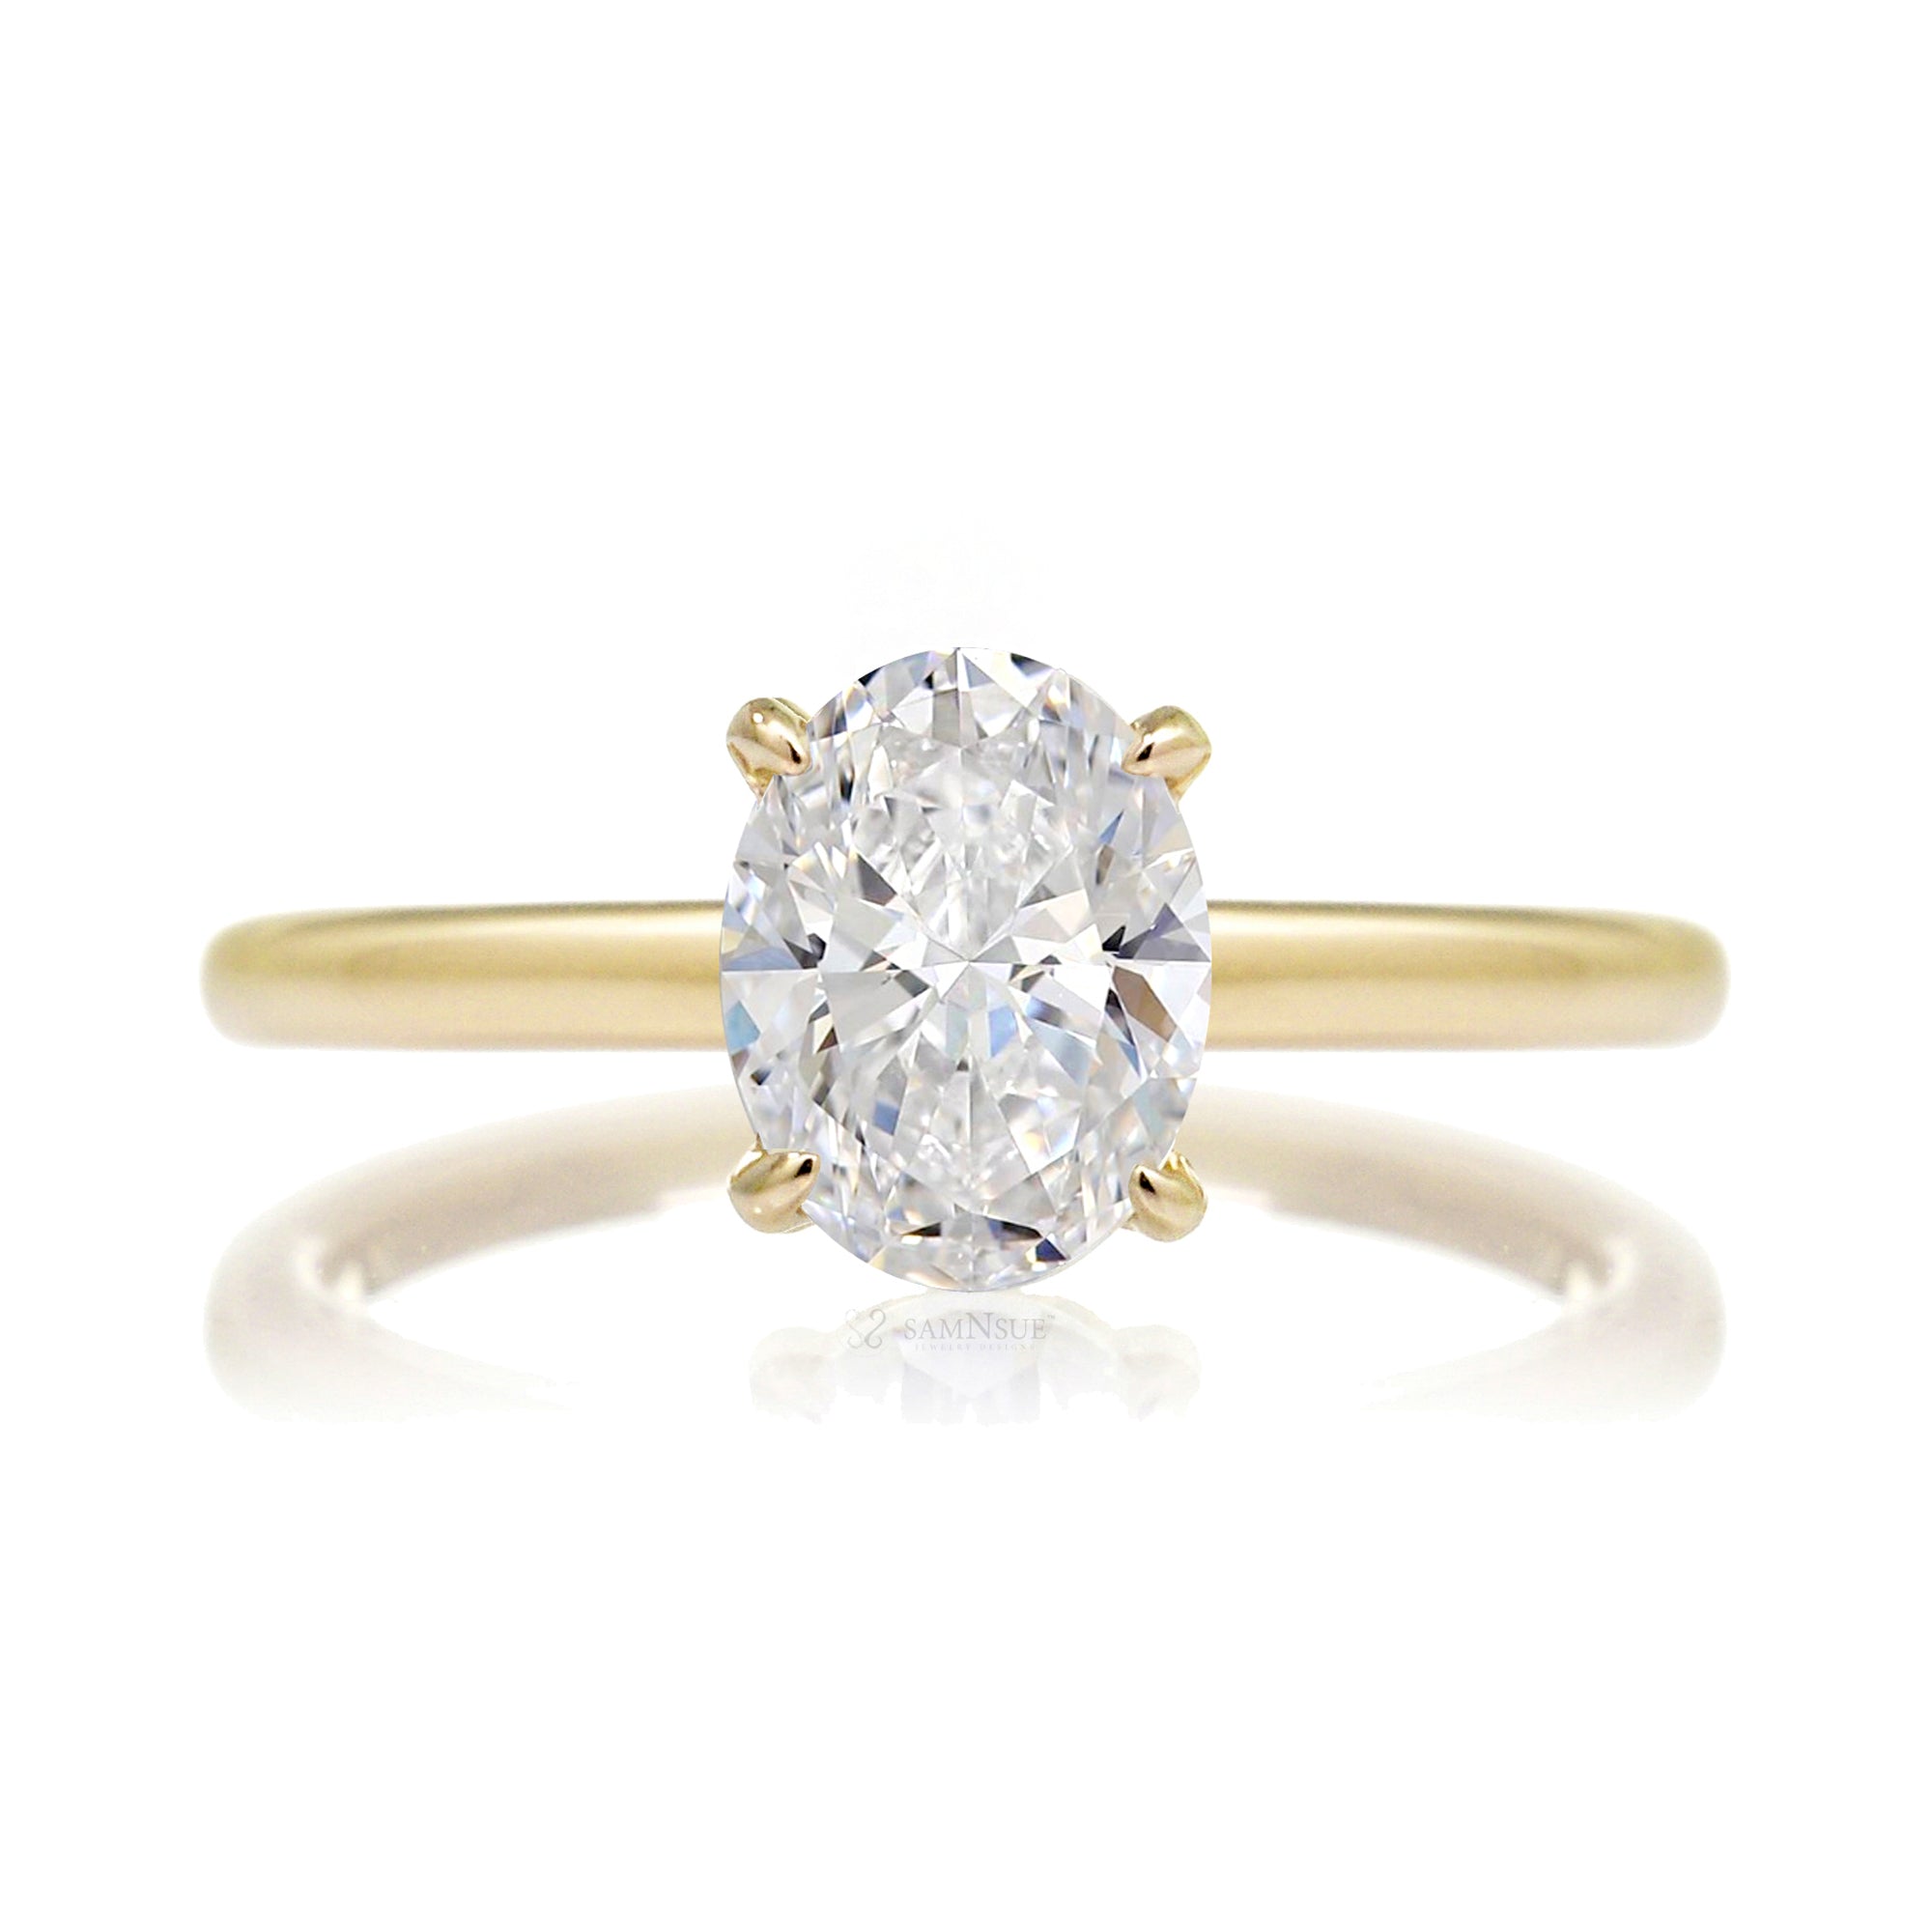 Oval diamond engagement ring solid band hidden halo in yellow gold